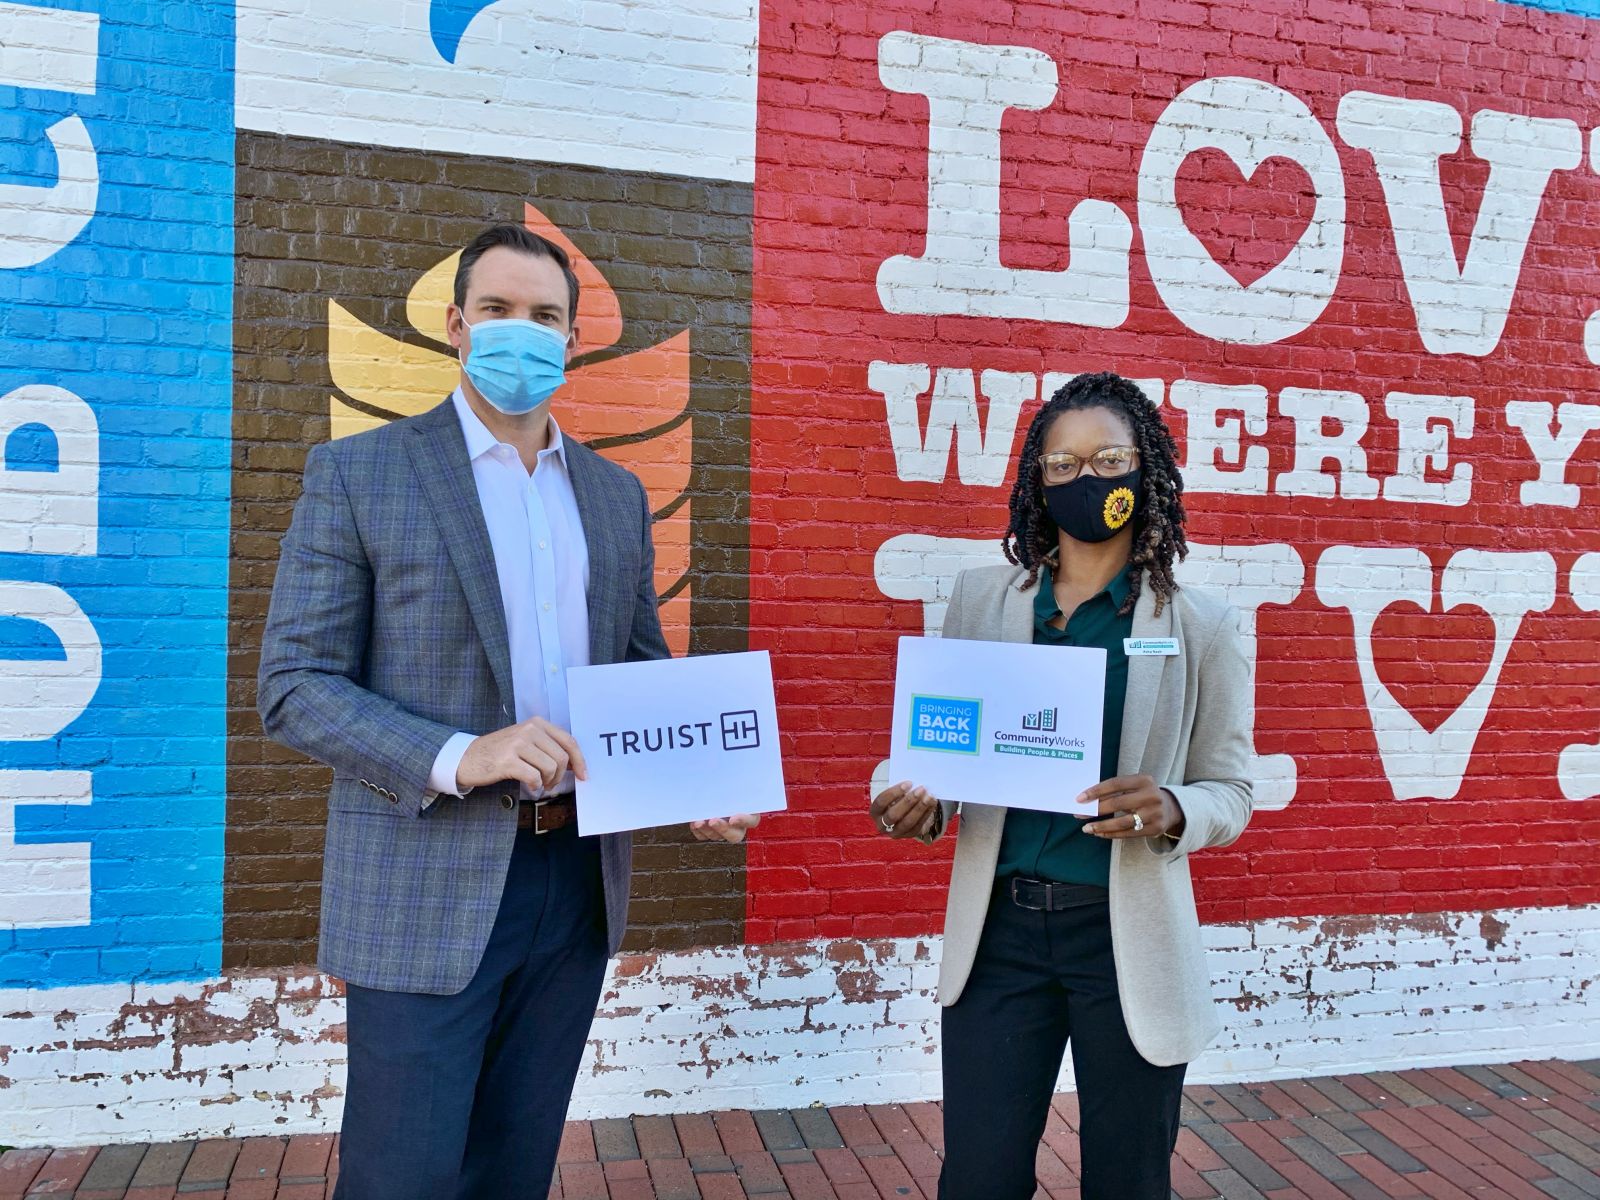 Representatives from Truist and CommunityWorks pose in front of a mural at Spartanburg's Morgan Square. (Photo/Provided)